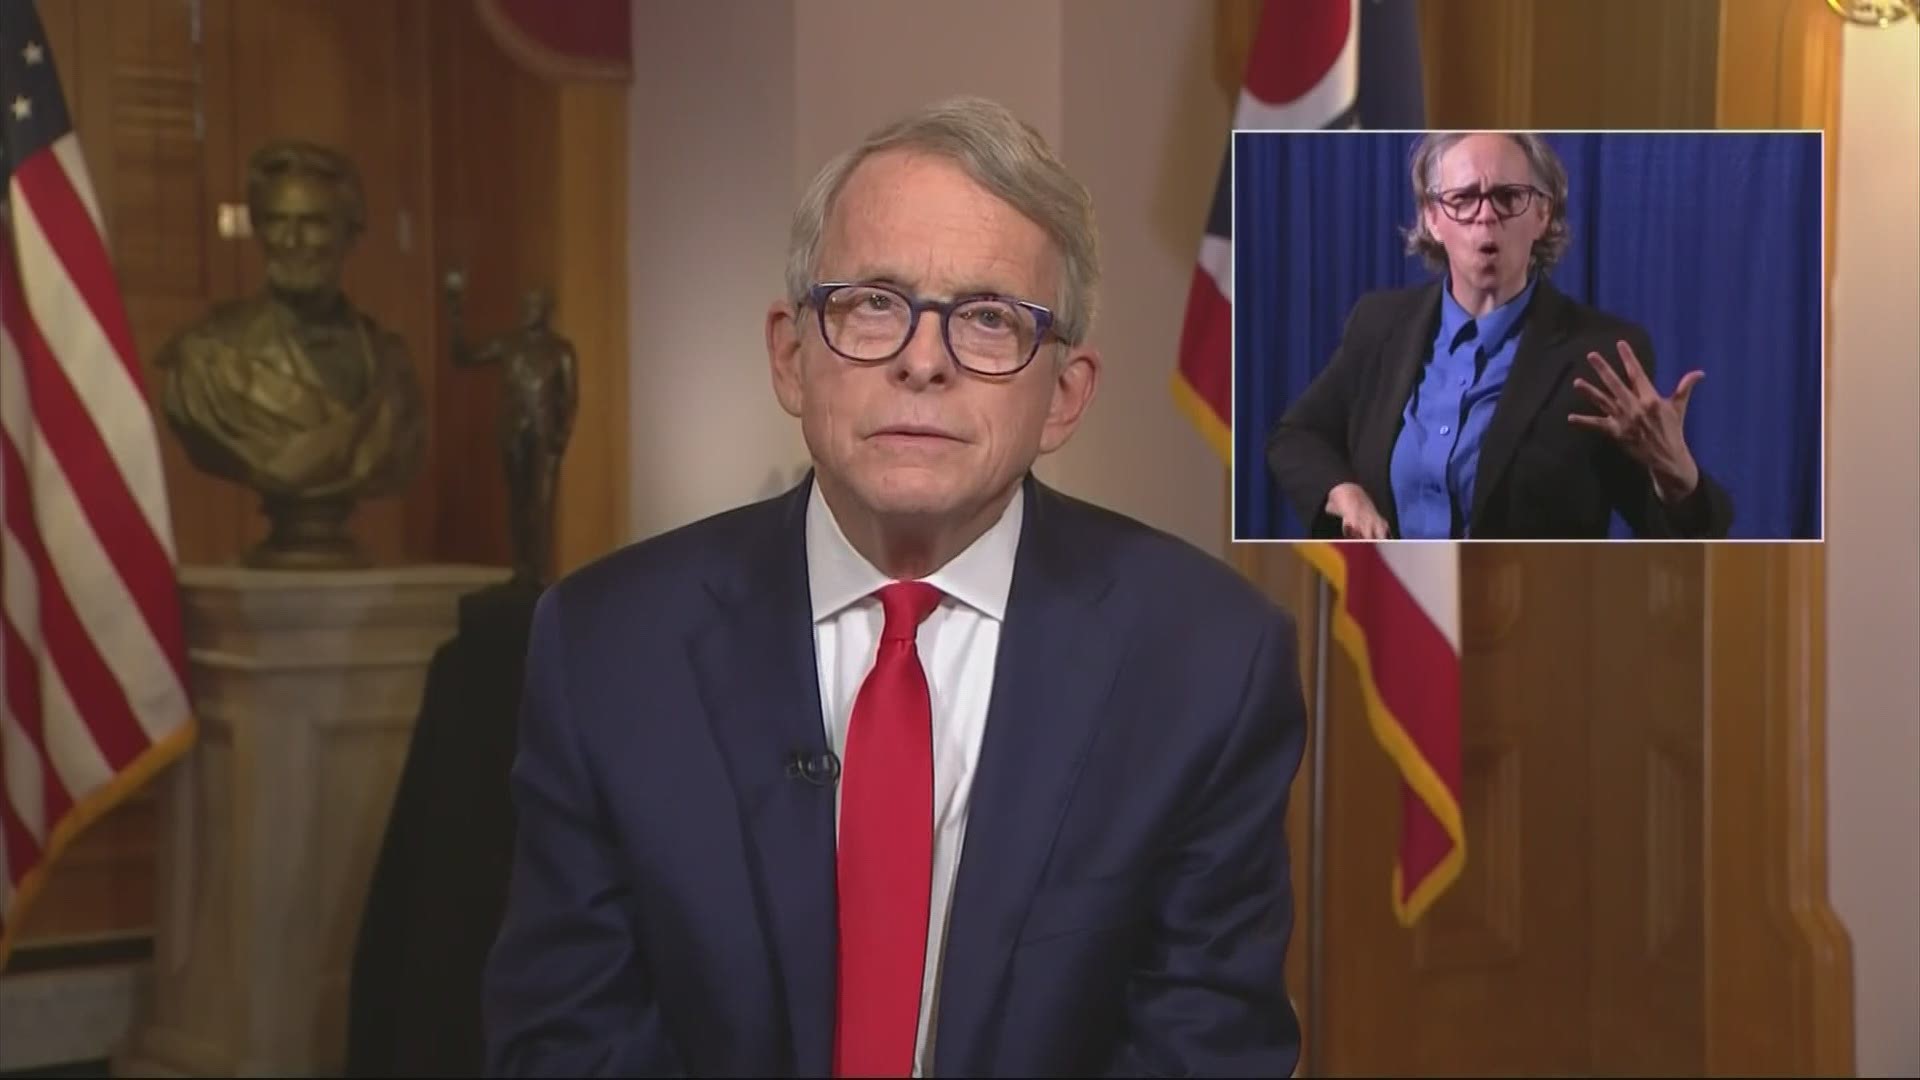 Governor Dewine implores Ohioans to wear masks and social distance to combat COVID-19